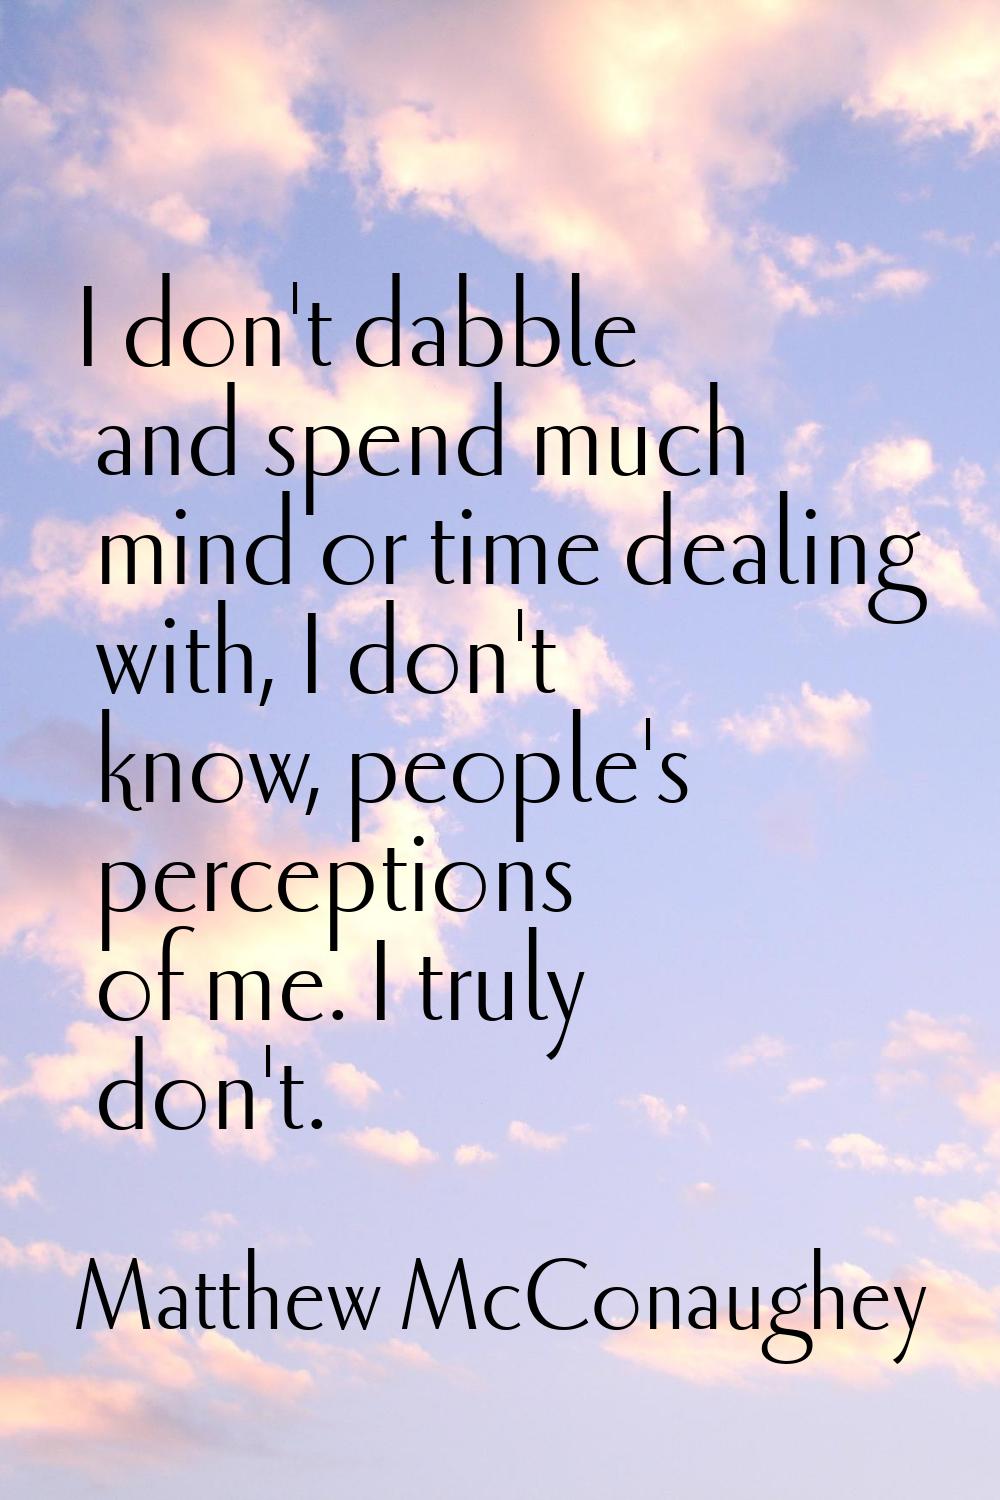 I don't dabble and spend much mind or time dealing with, I don't know, people's perceptions of me. 